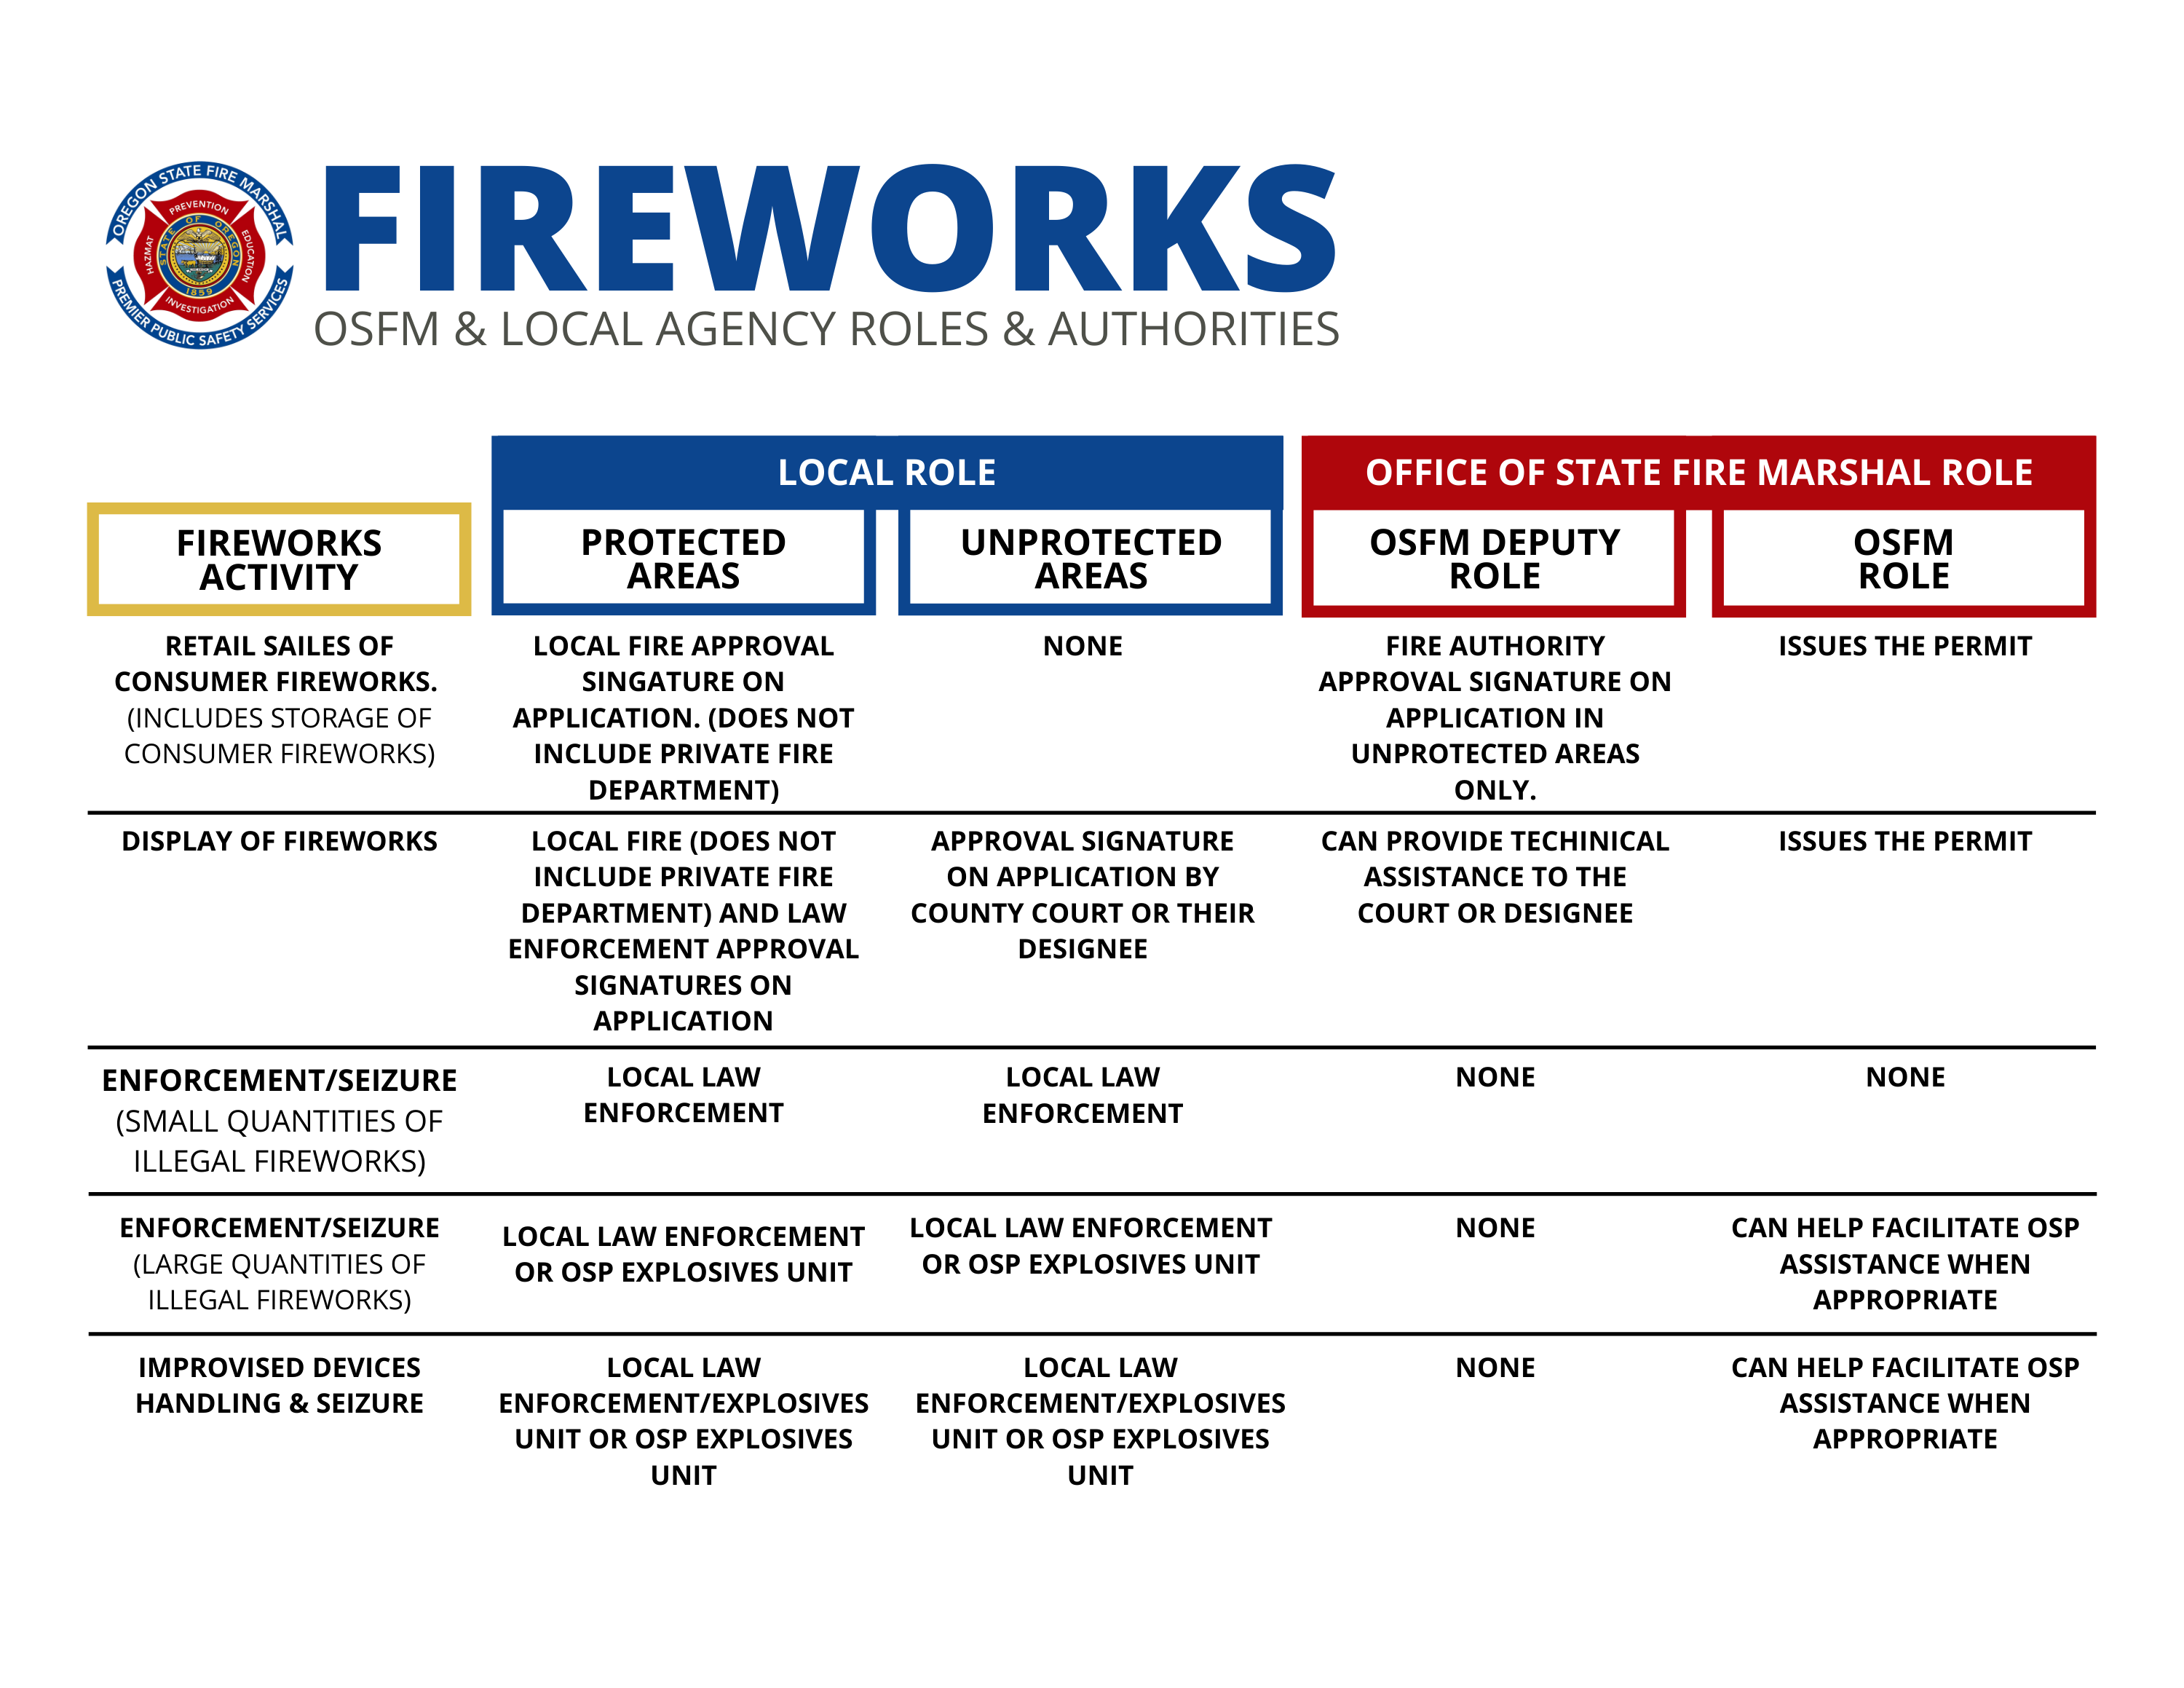 IMAGE Fireworks OSFM and local agency roles (2).png